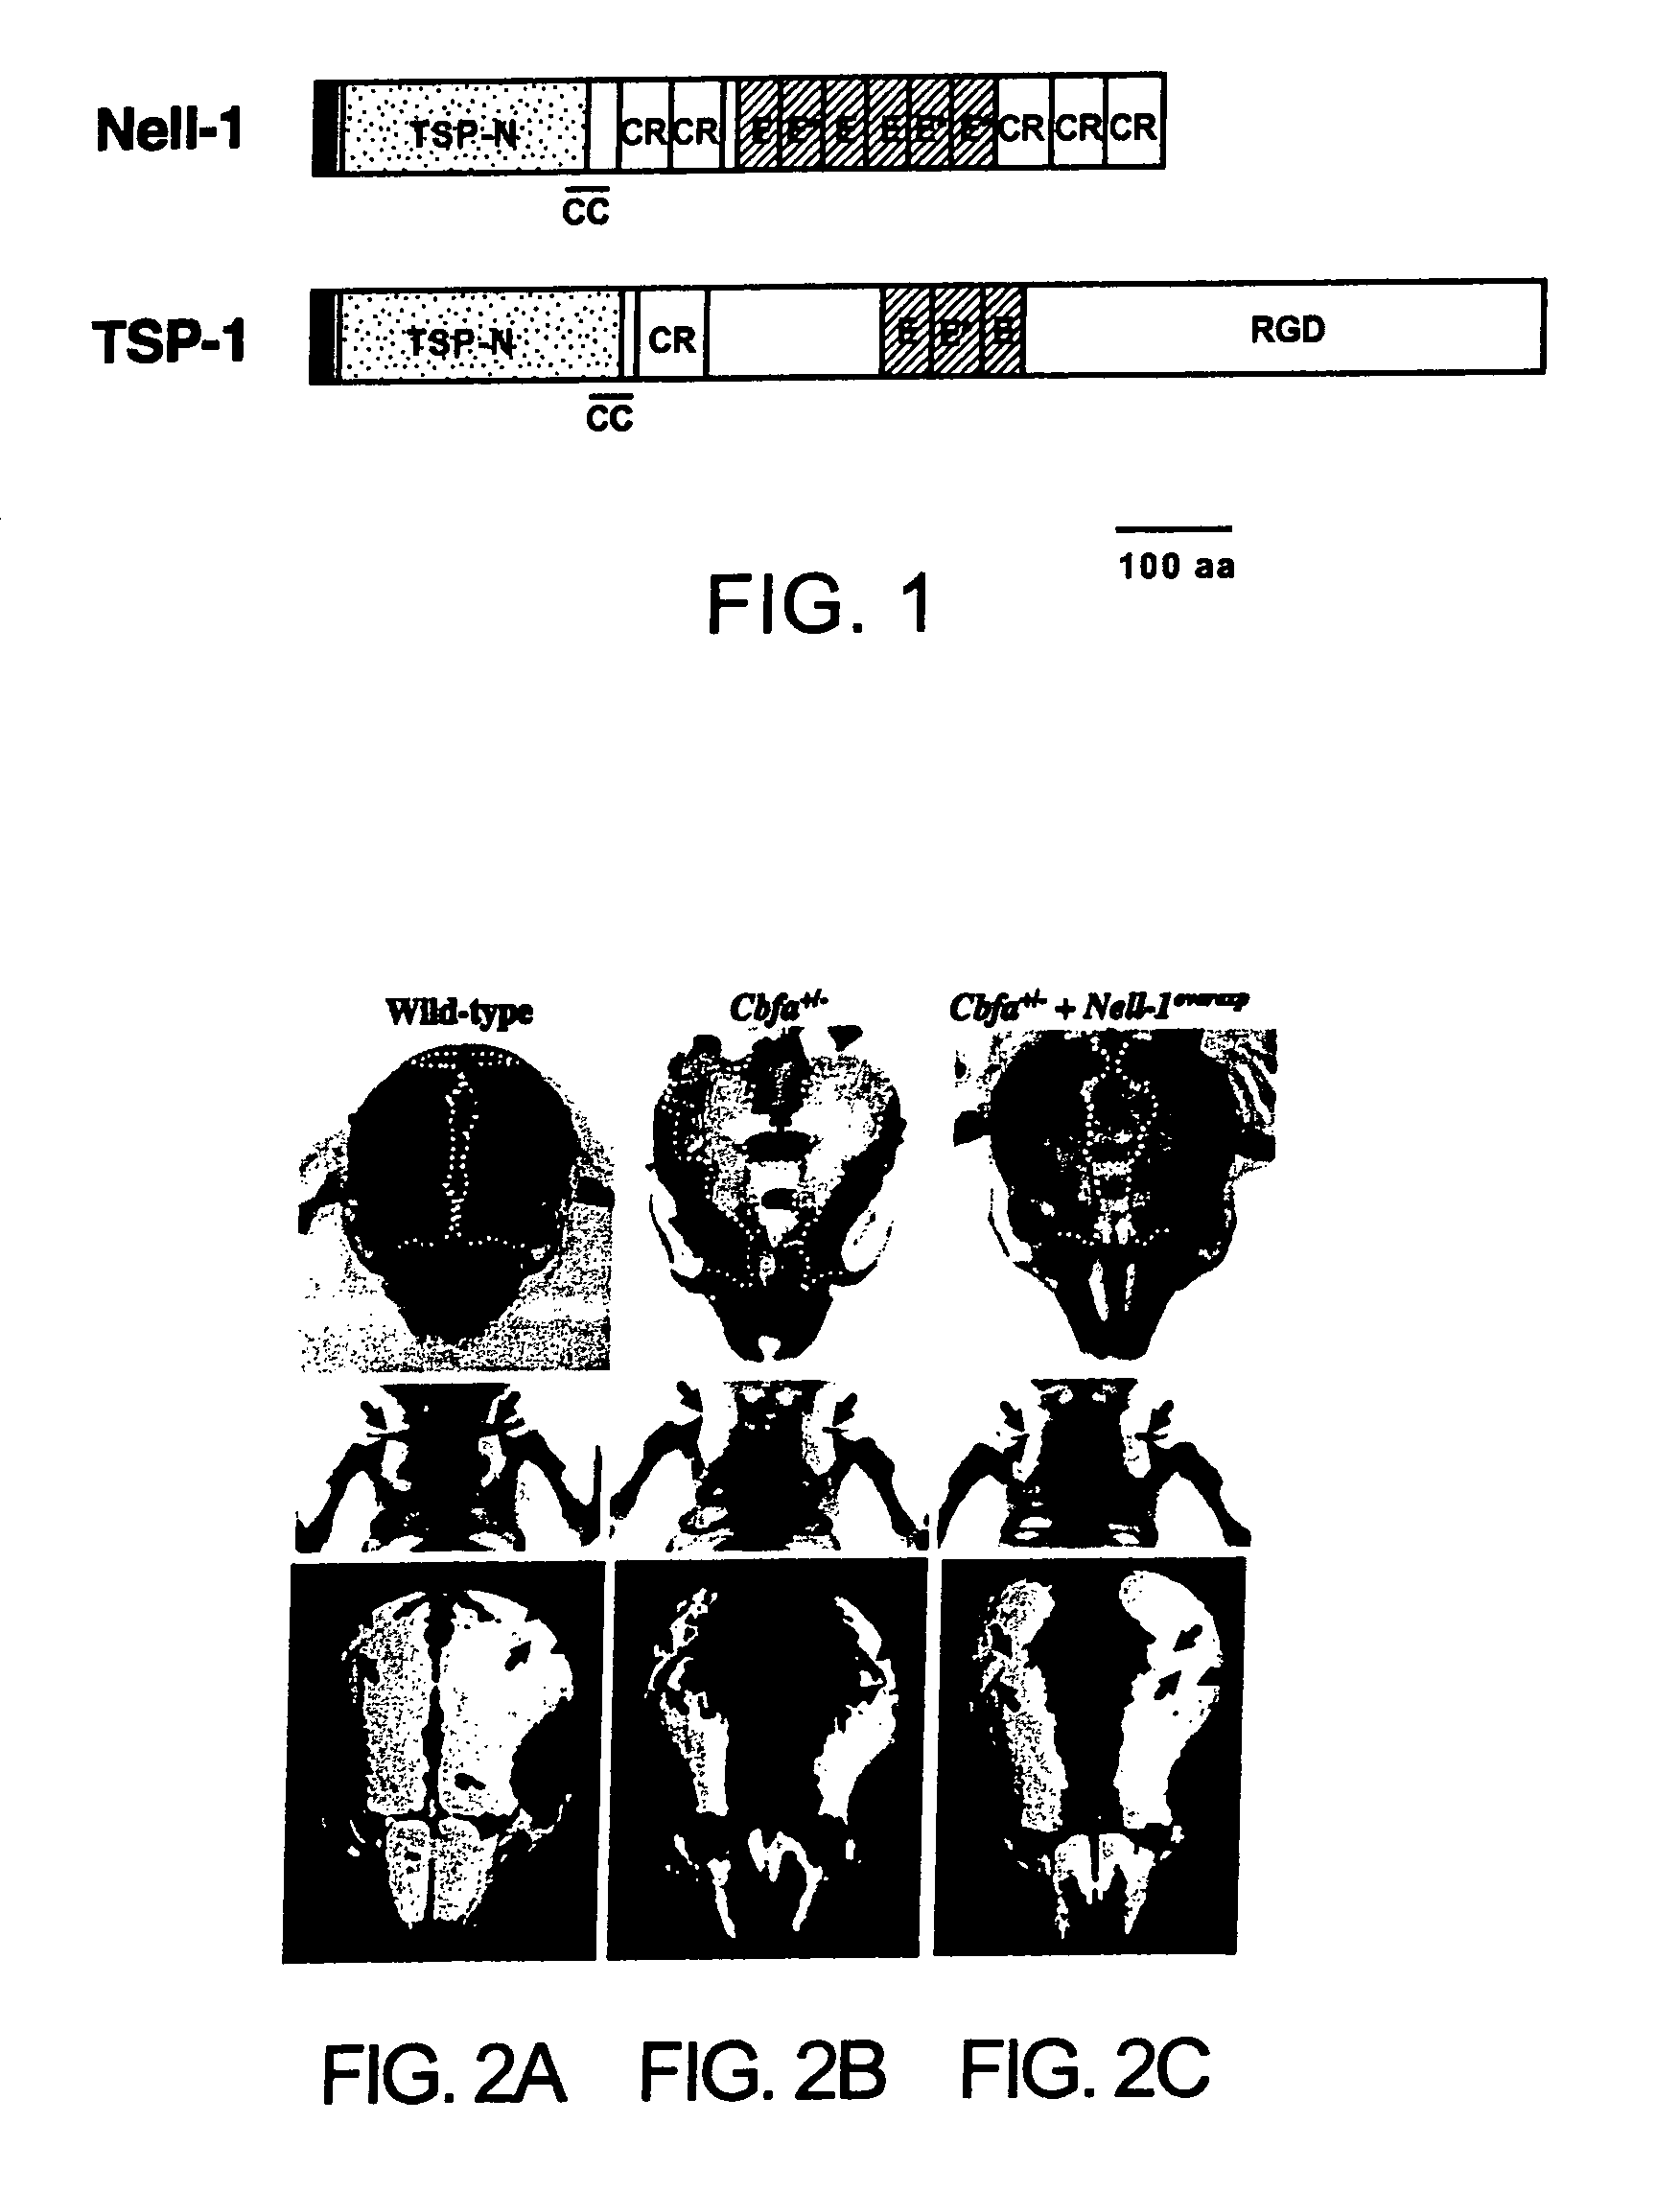 Pharmaceutical compositions for treating or preventing bone conditions